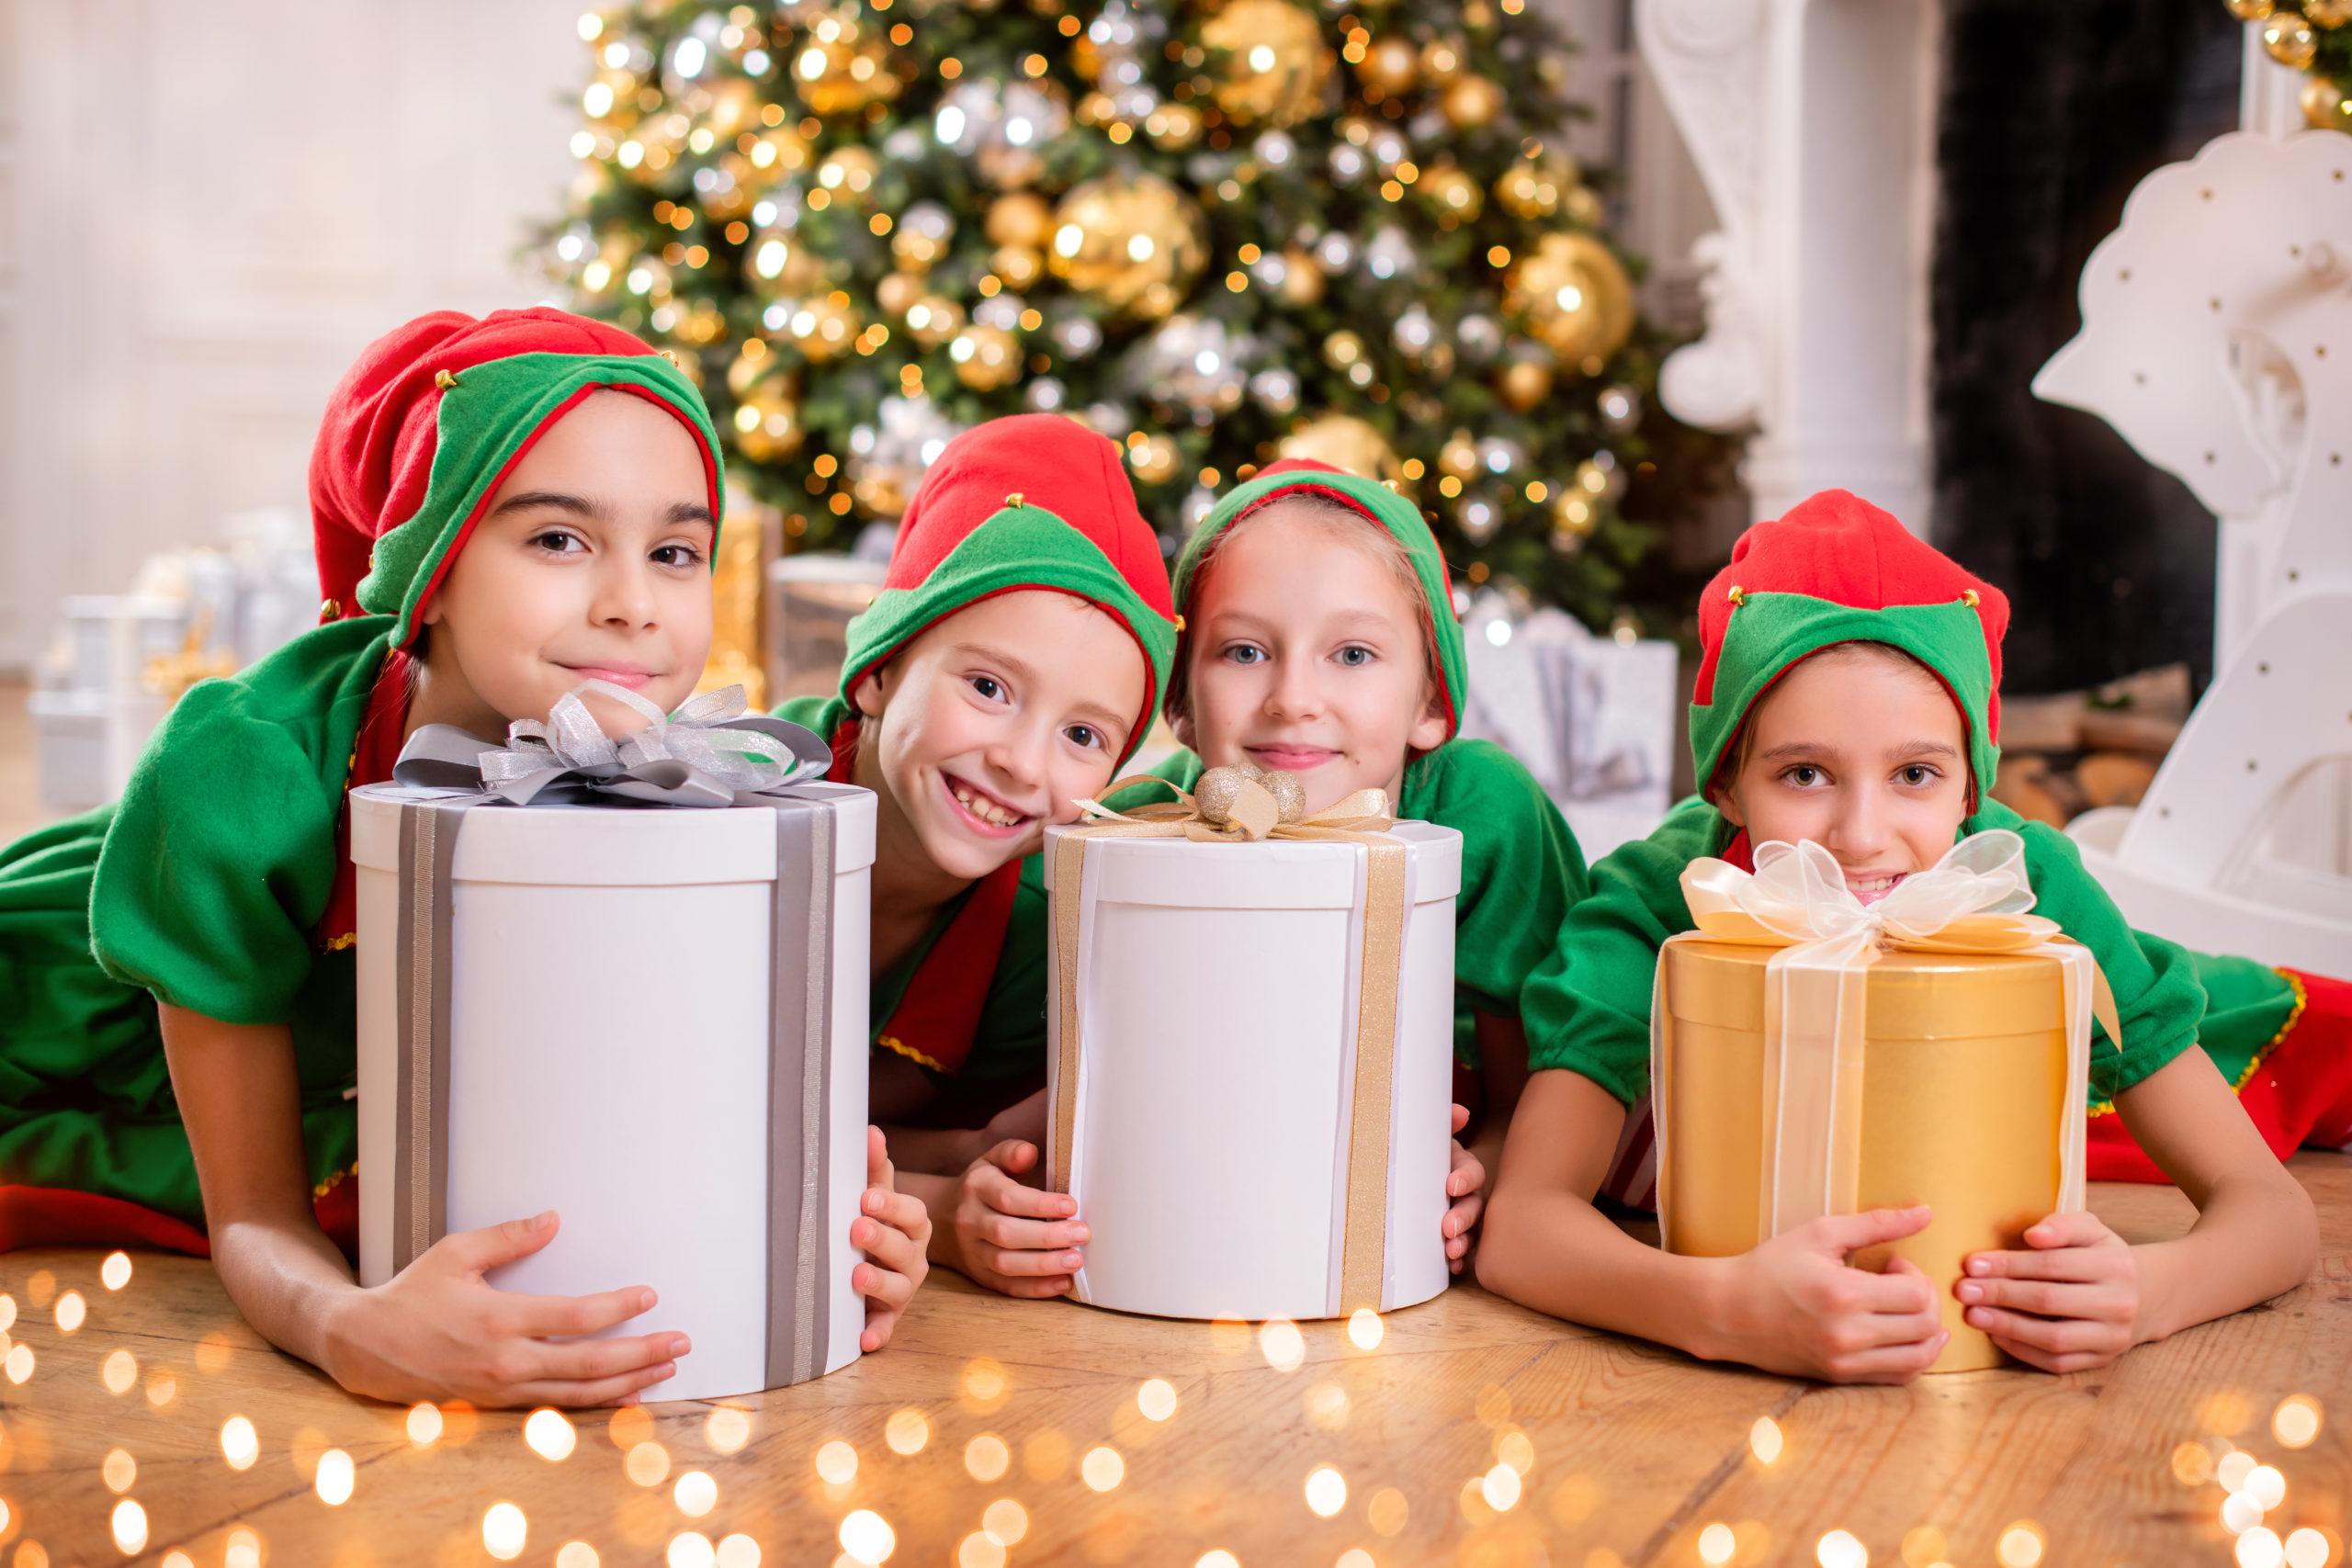 Group of cheerful happy children in costumes of elves with gifts on background of Christmas tree